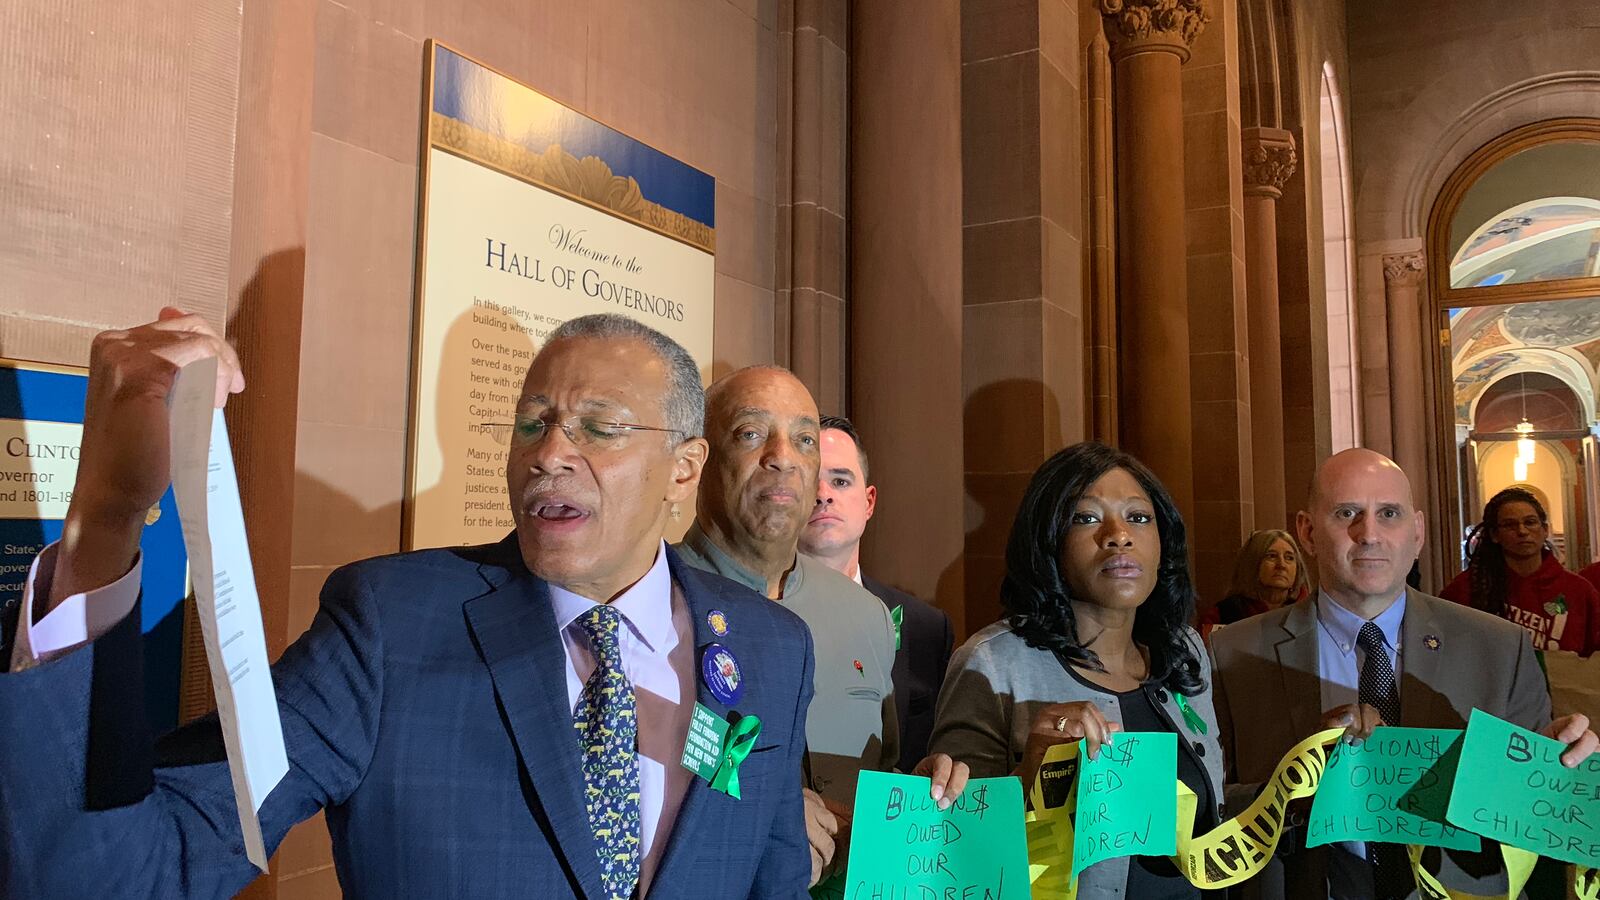 Sen. Robert Jackson led a rally last year in the state capitol and read aloud a letter to Gov. Andrew Cuomo, asking him to meet their demands for more state education funding.